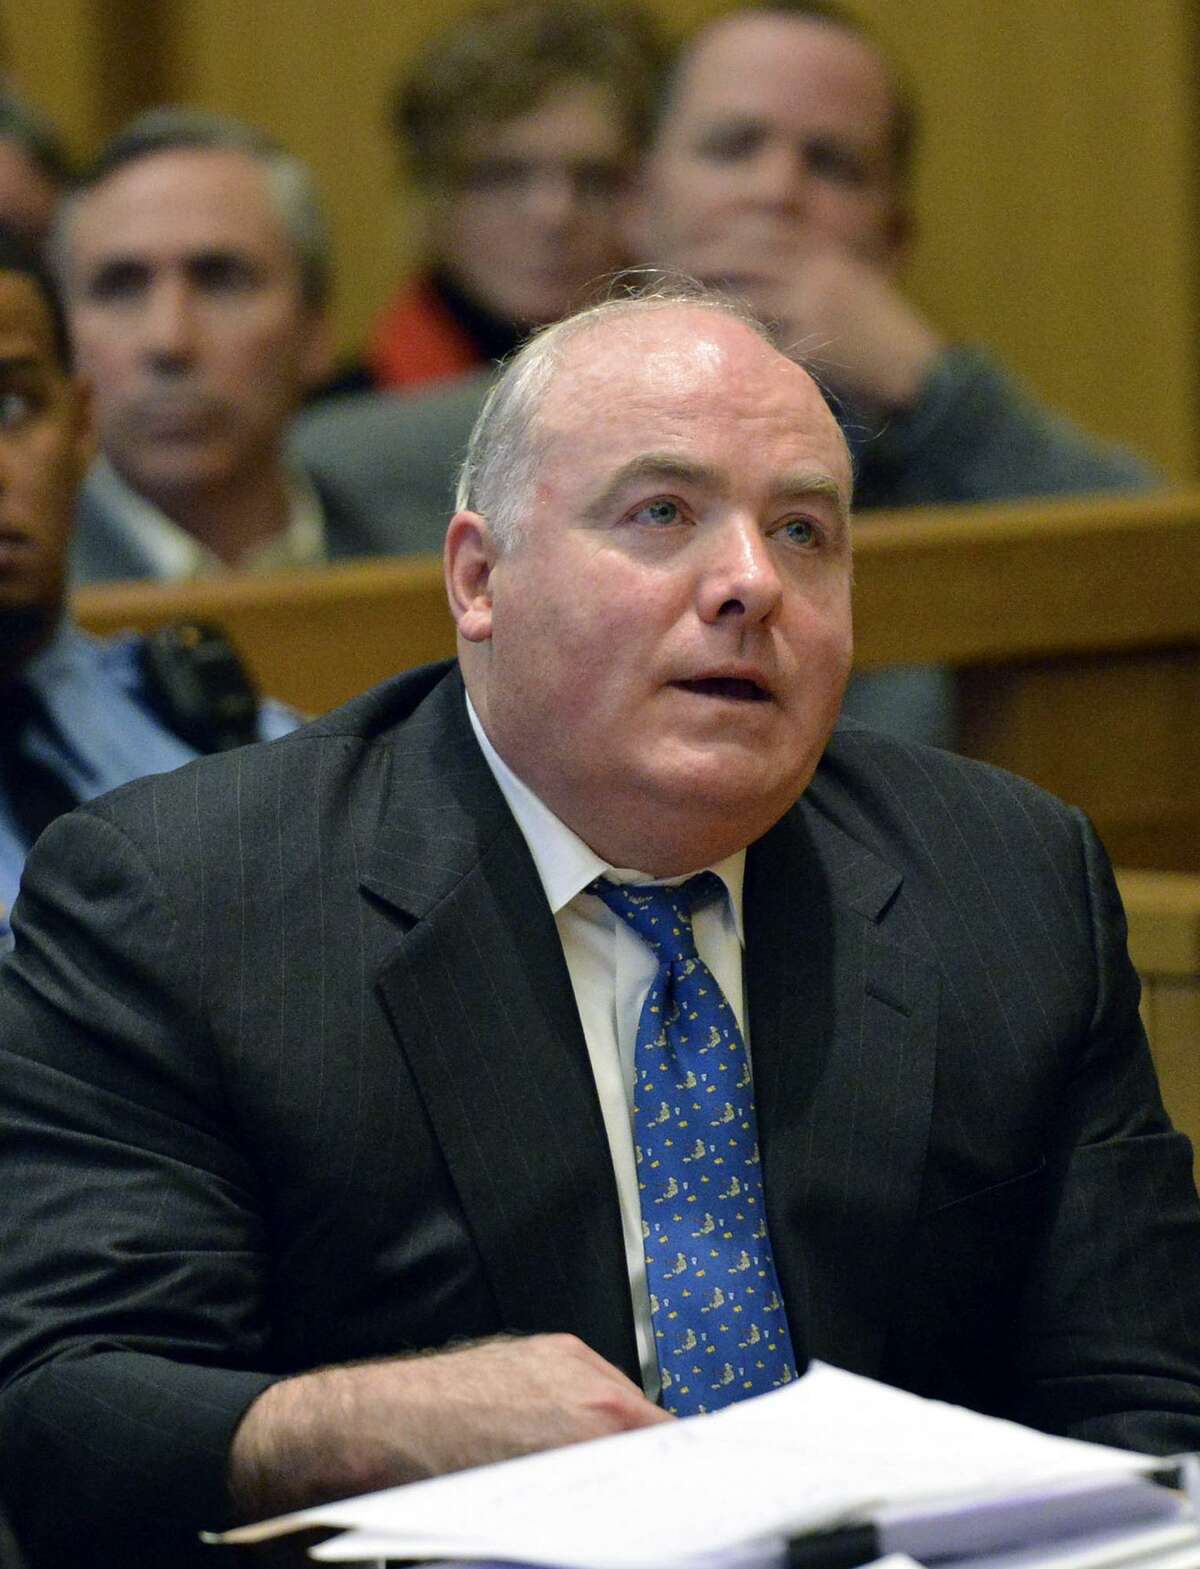 In this Nov. 21, 2013 file photo, Michael Skakel reacts to being granted bail during his bond hearing at Stamford, Conn., Superior Court. Skakel was convicted in 2002 of the October 1975 murder of Martha Moxley, but a judge granted a new trial in 2013 saying his trial attorney, Michael Sherman, failed to adequately represent him. Prosecutors filed an appeal Friday, Aug. 8, 2014 and said the judge was wrong to grant a new trial, rejecting his conclusion that Skakel's trial attorney should have focused more on his brother Thomas Skakel. (AP Photo/The Stamford Advocate, Bob Luckey, Pool, File)